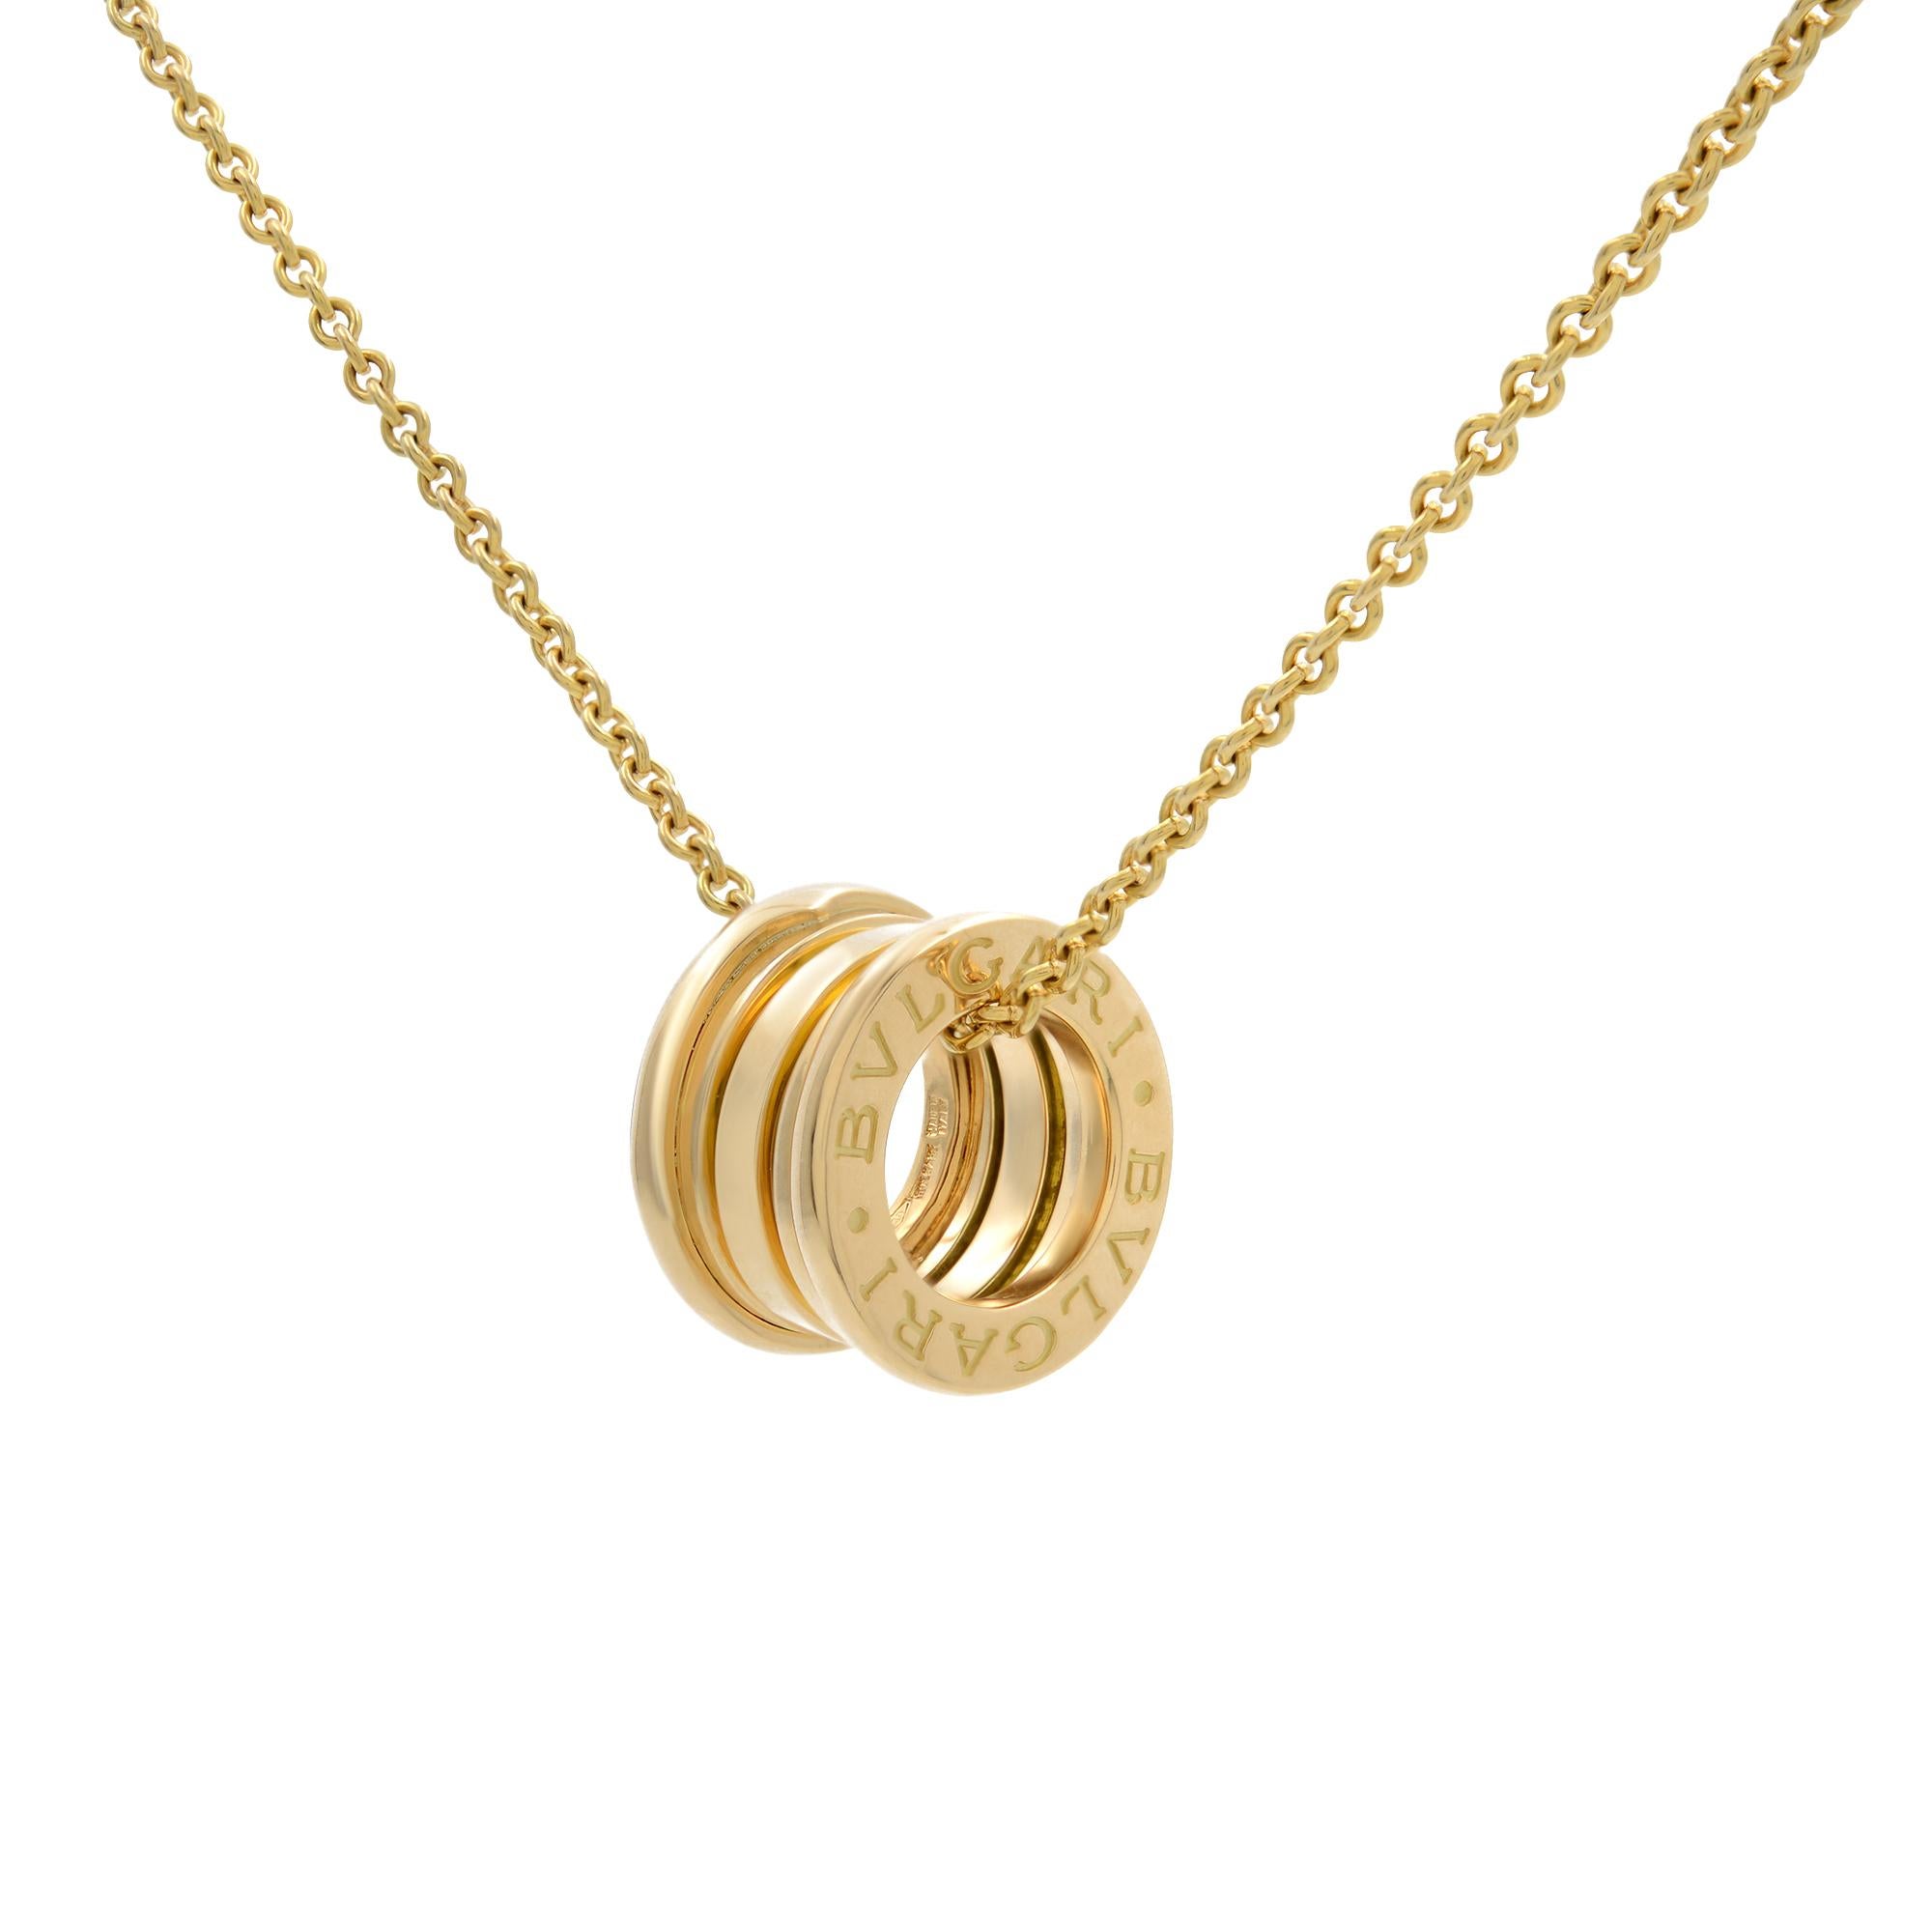 Bvlgari minimalist yet classy and elegant necklace from B.Zero 1 collection.  Crafted in 18k yellow gold, it flaunts the iconic  ring as the pendant. A delicate piece of jewelry that accents almost every outfit with grace and panache and is a